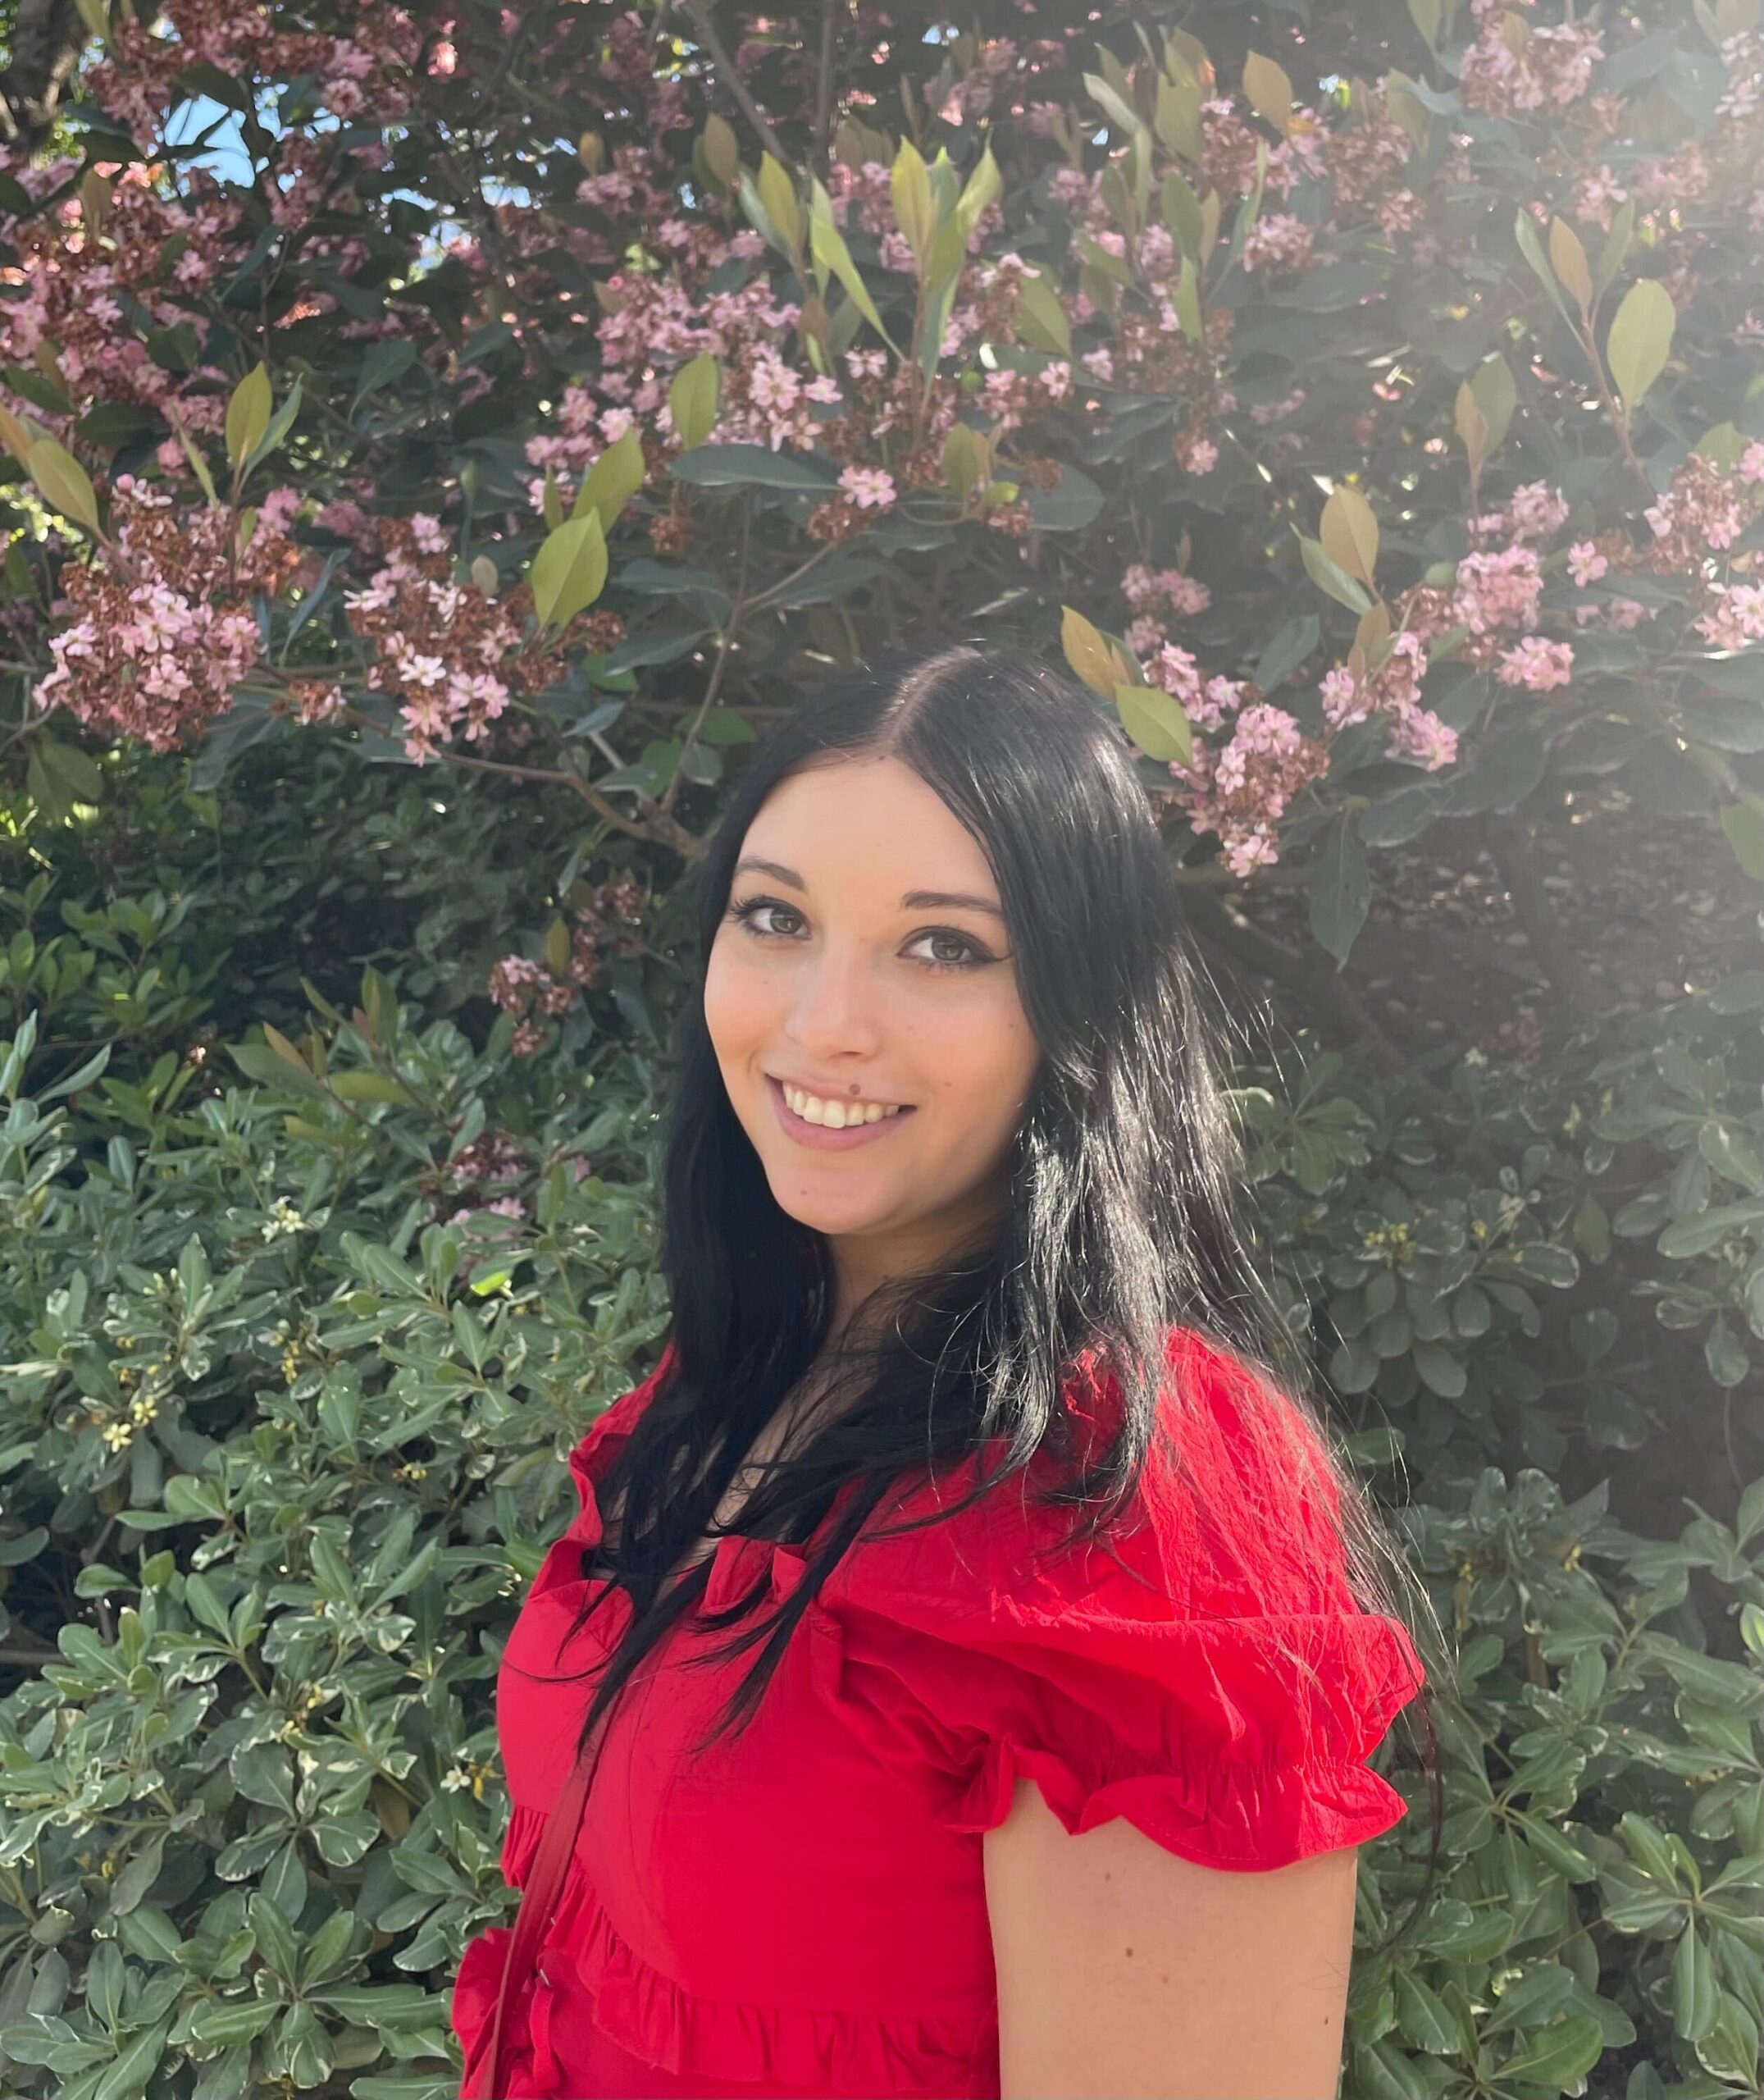 Headshot of Research Assistant Nicole Spiller wearing a red shirt and standing in front of green foliage.